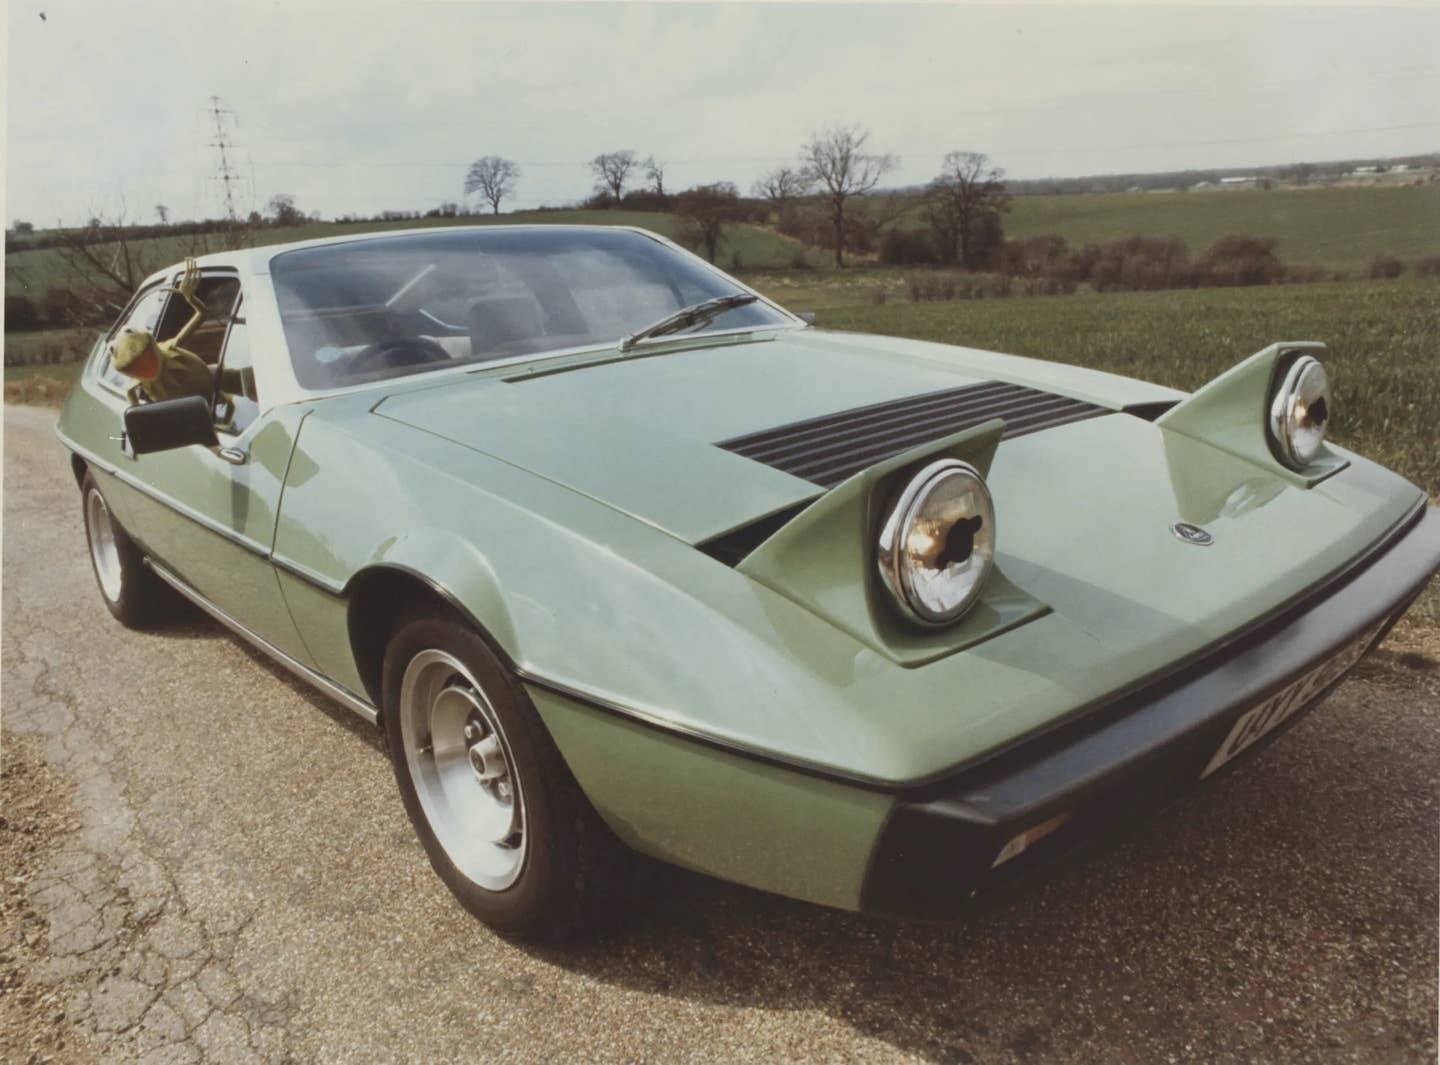 Jim Henson's 1978 Lotus Éclat with its short-lived Kermit the Frog pupils. Kermit himself leans out of the driver's window.